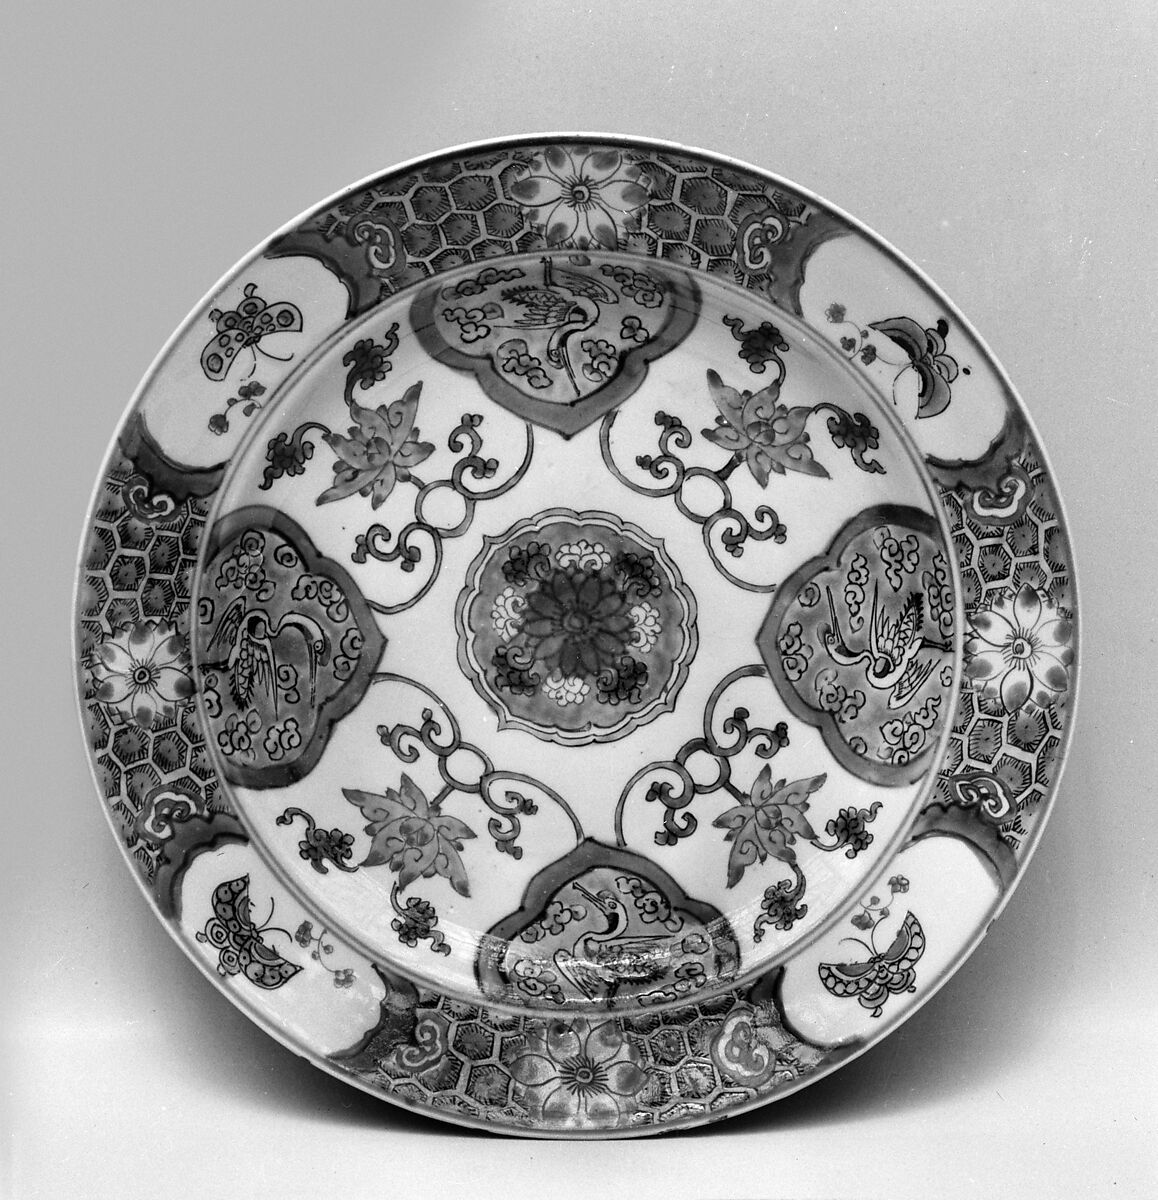 Dish with floral patterns, Porcelain painted in overglaze polychrome enamels (Jingdezhen ware), China 